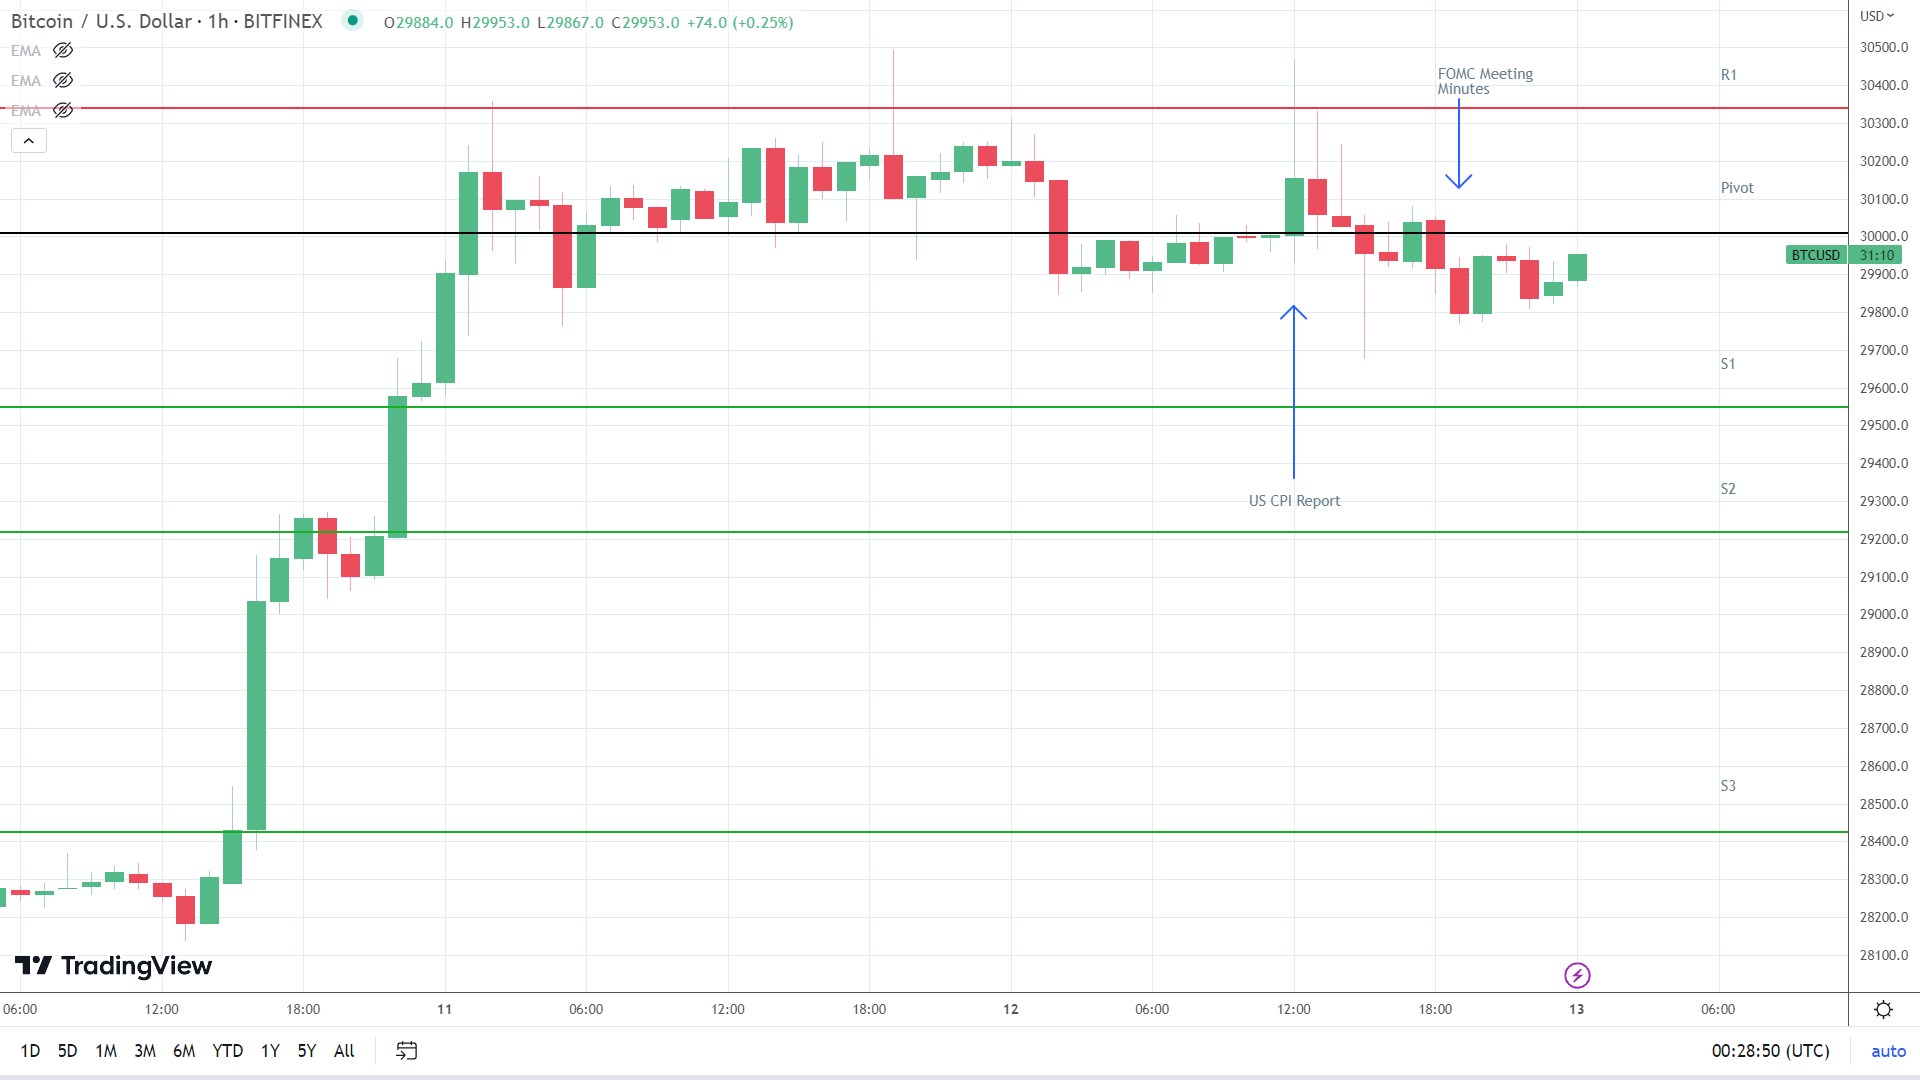 BTC response to US CPI Report and FOMC Meeting Minutes